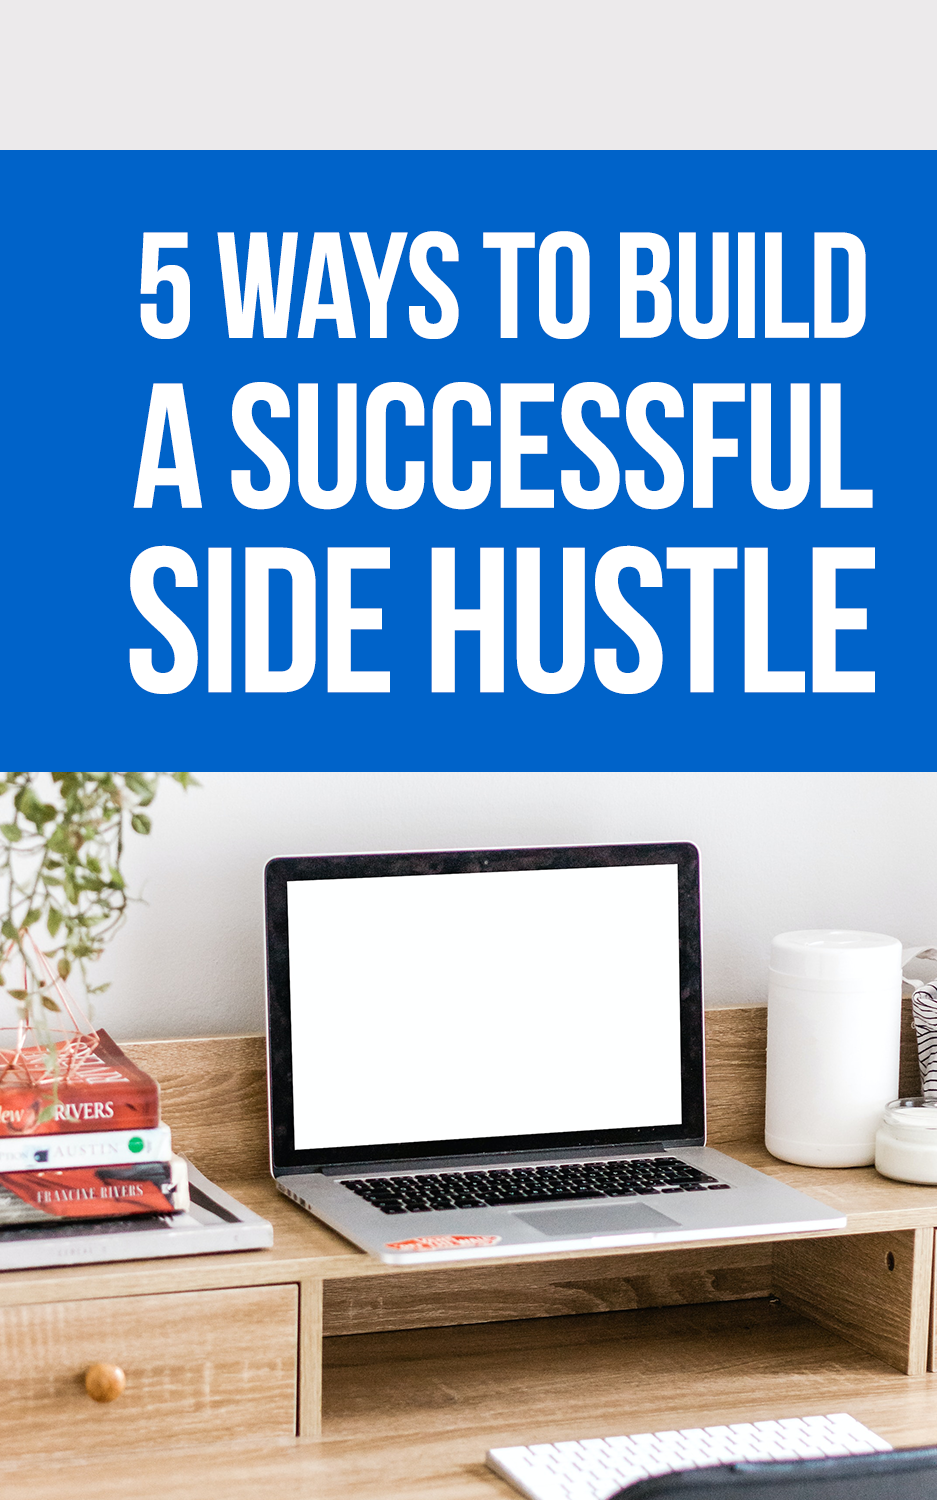 5 Ways To Build a Successful Side Hustle